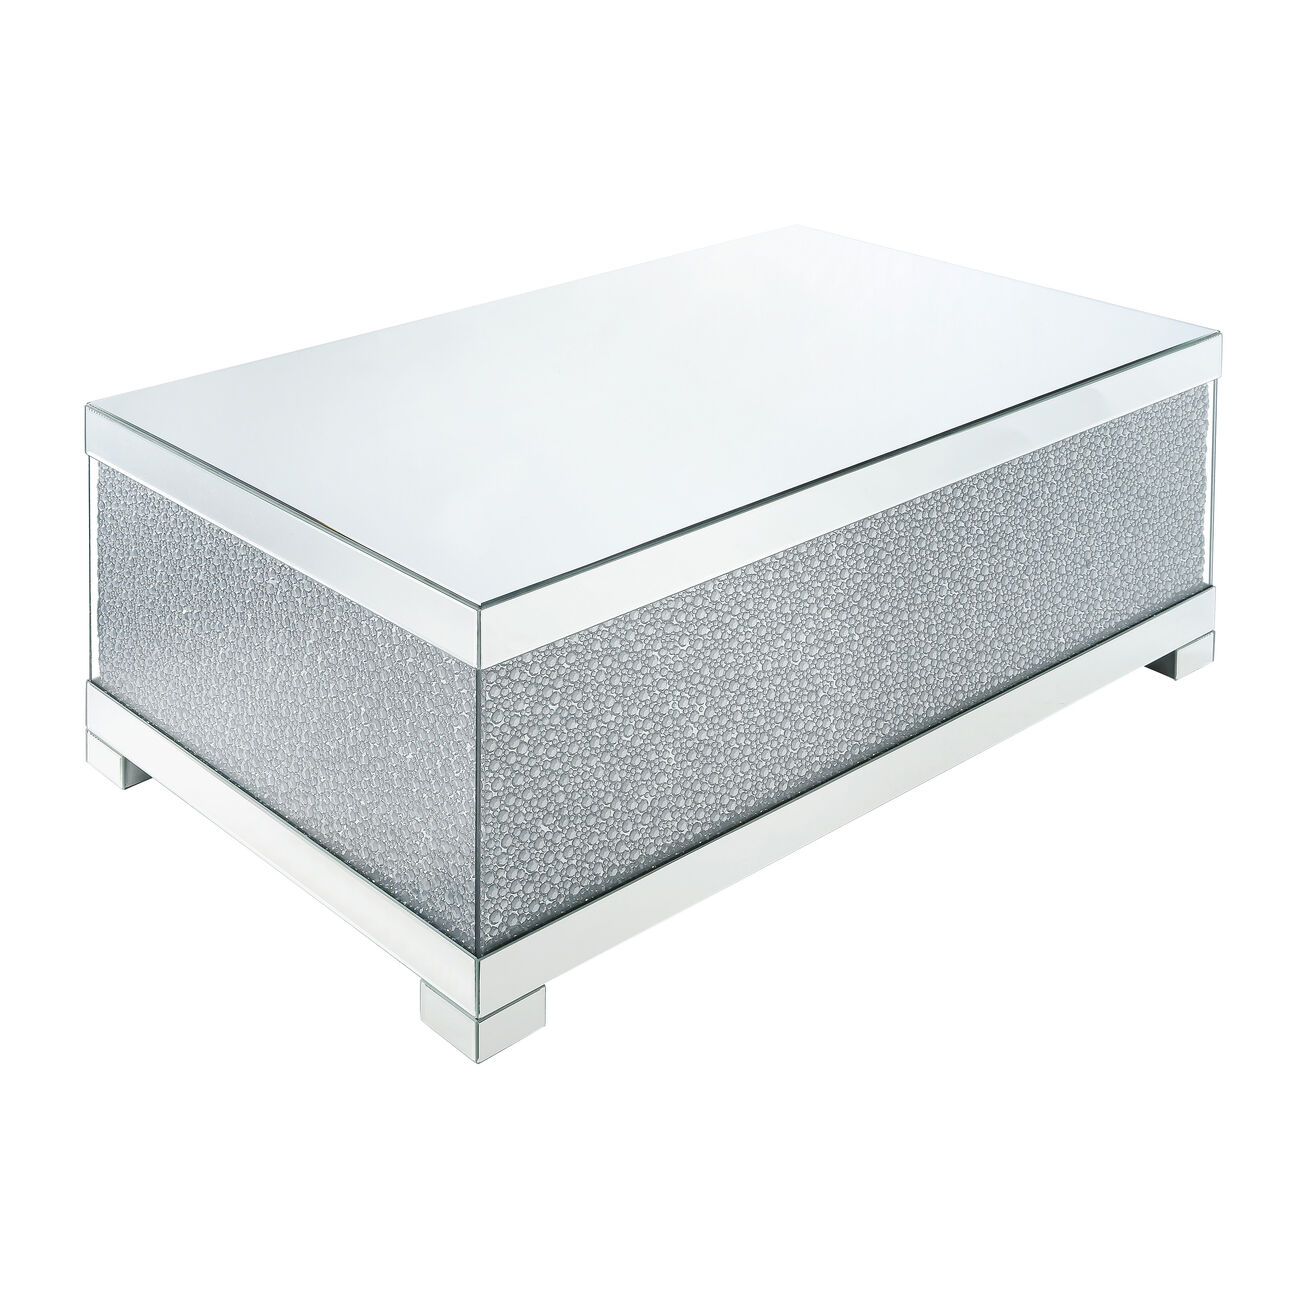 Rectangular Wooden Coffee Table with Faux Crystal Inlays, Silver